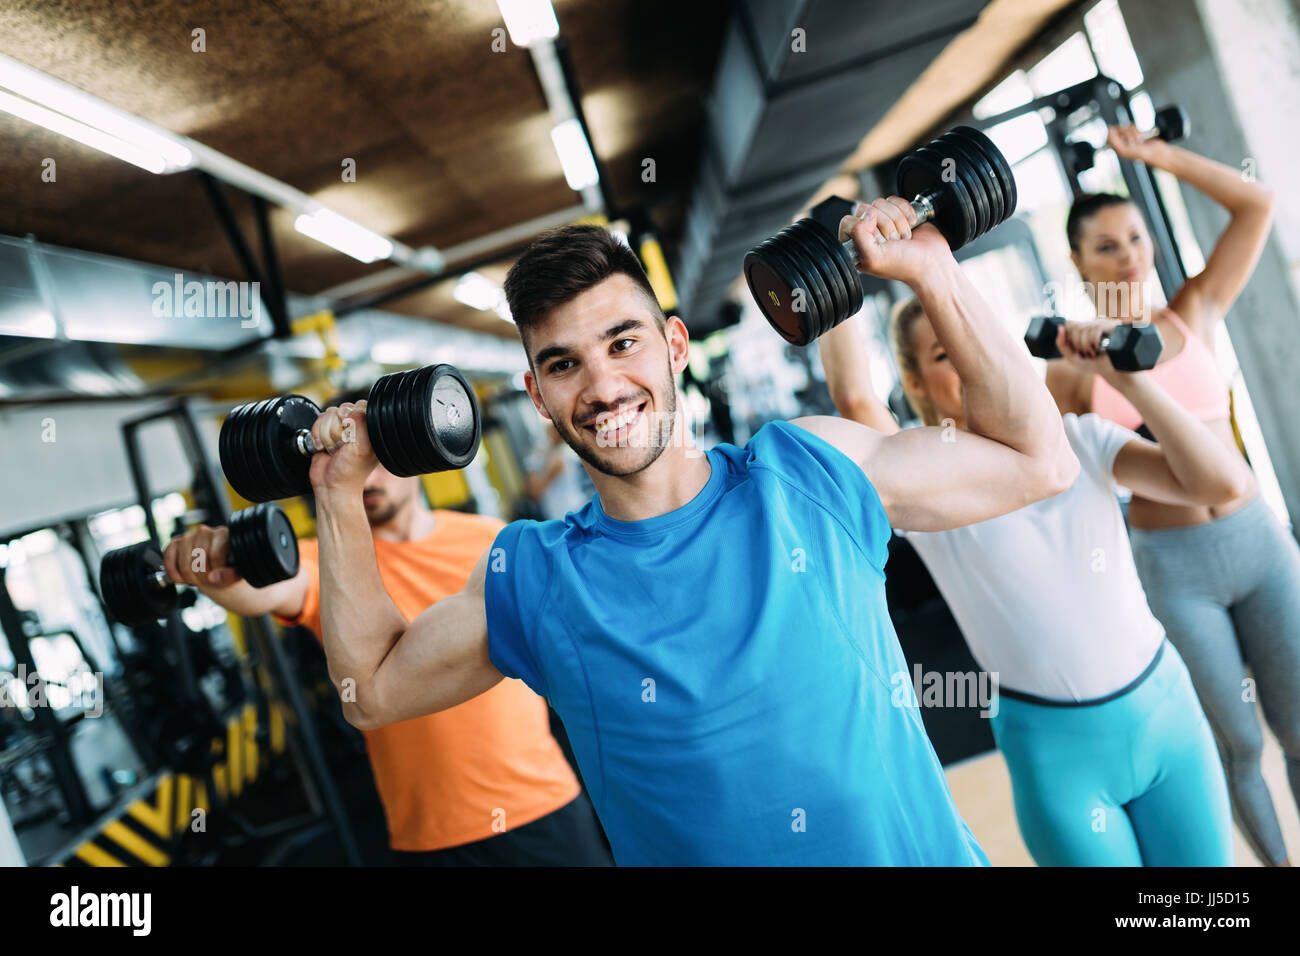 Group of people training together in gym Stock Photo